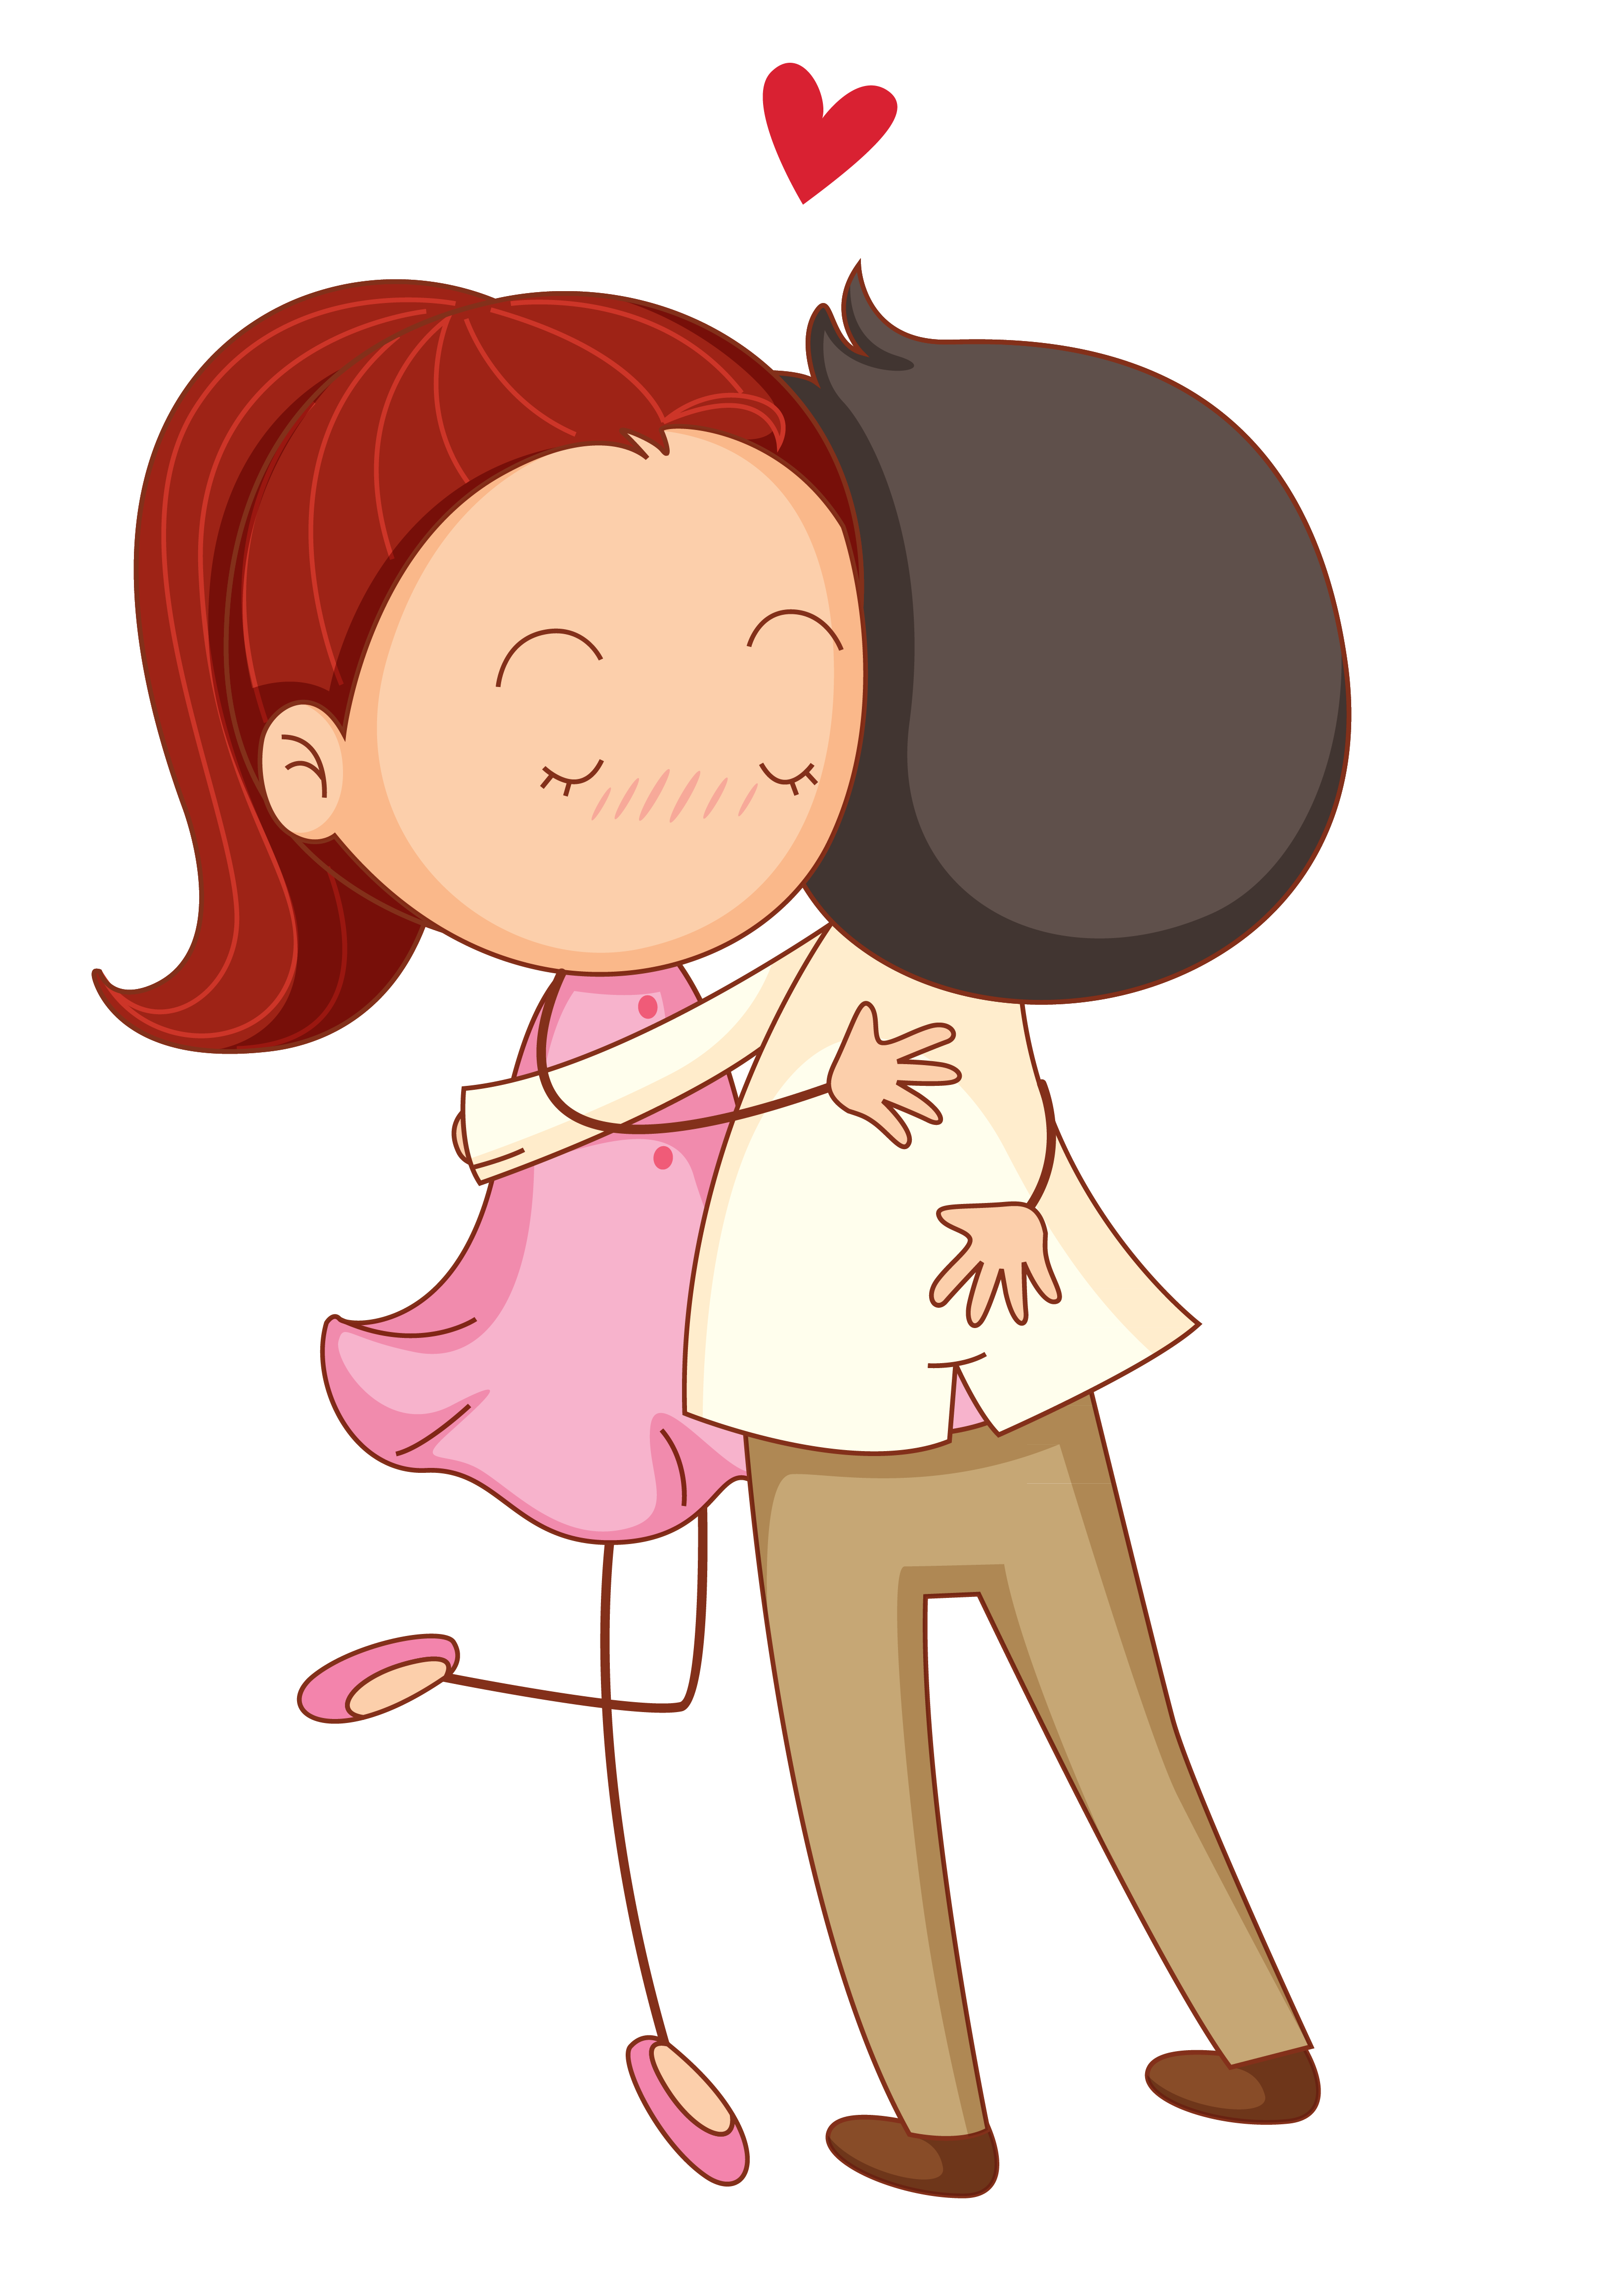 Download Romance Couple Hug Love Cartoon PNG Image High Quality Clipart PNG...